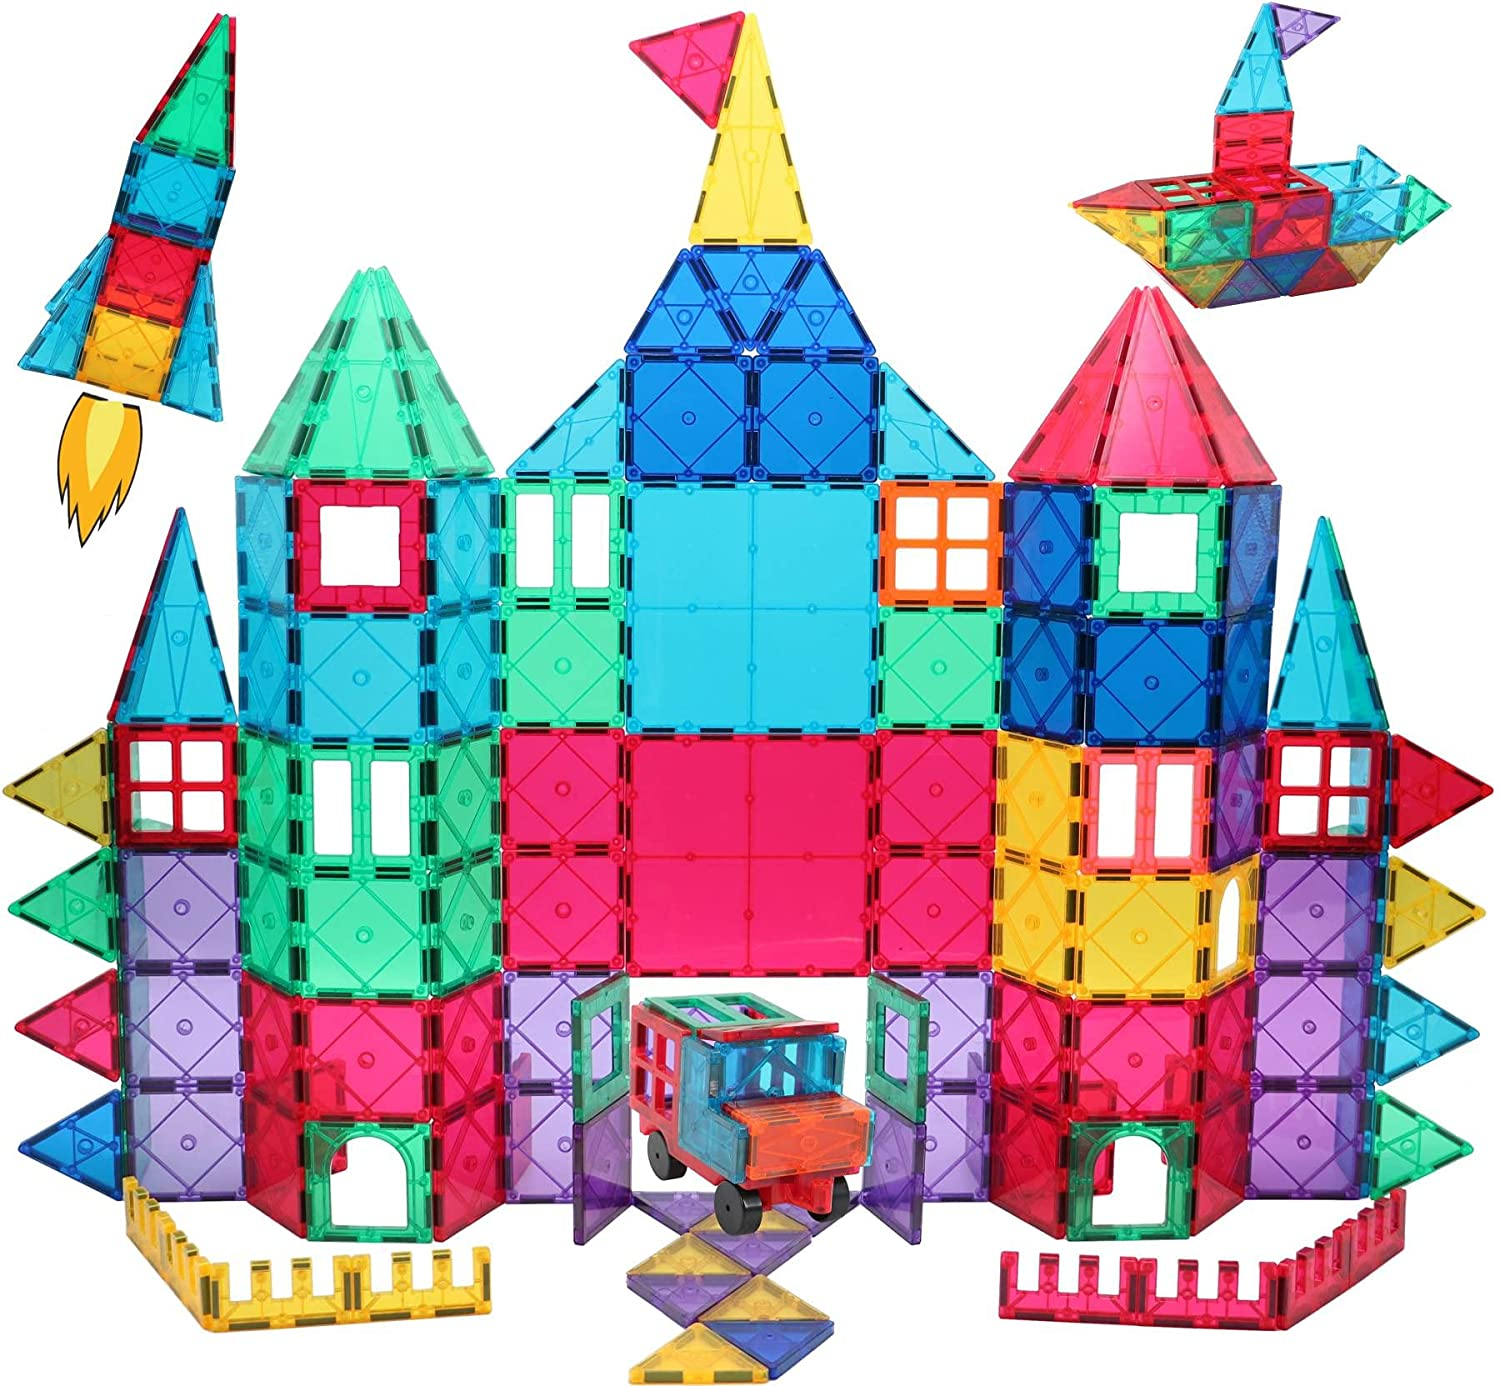 Amazon.com: Manve Magnetic Blocks Tiles Toy, 130 PCS Magnet Building Toys，Educational Toys for Kids Children with 2 Sets of CAR Chassis: Toys & Games $36